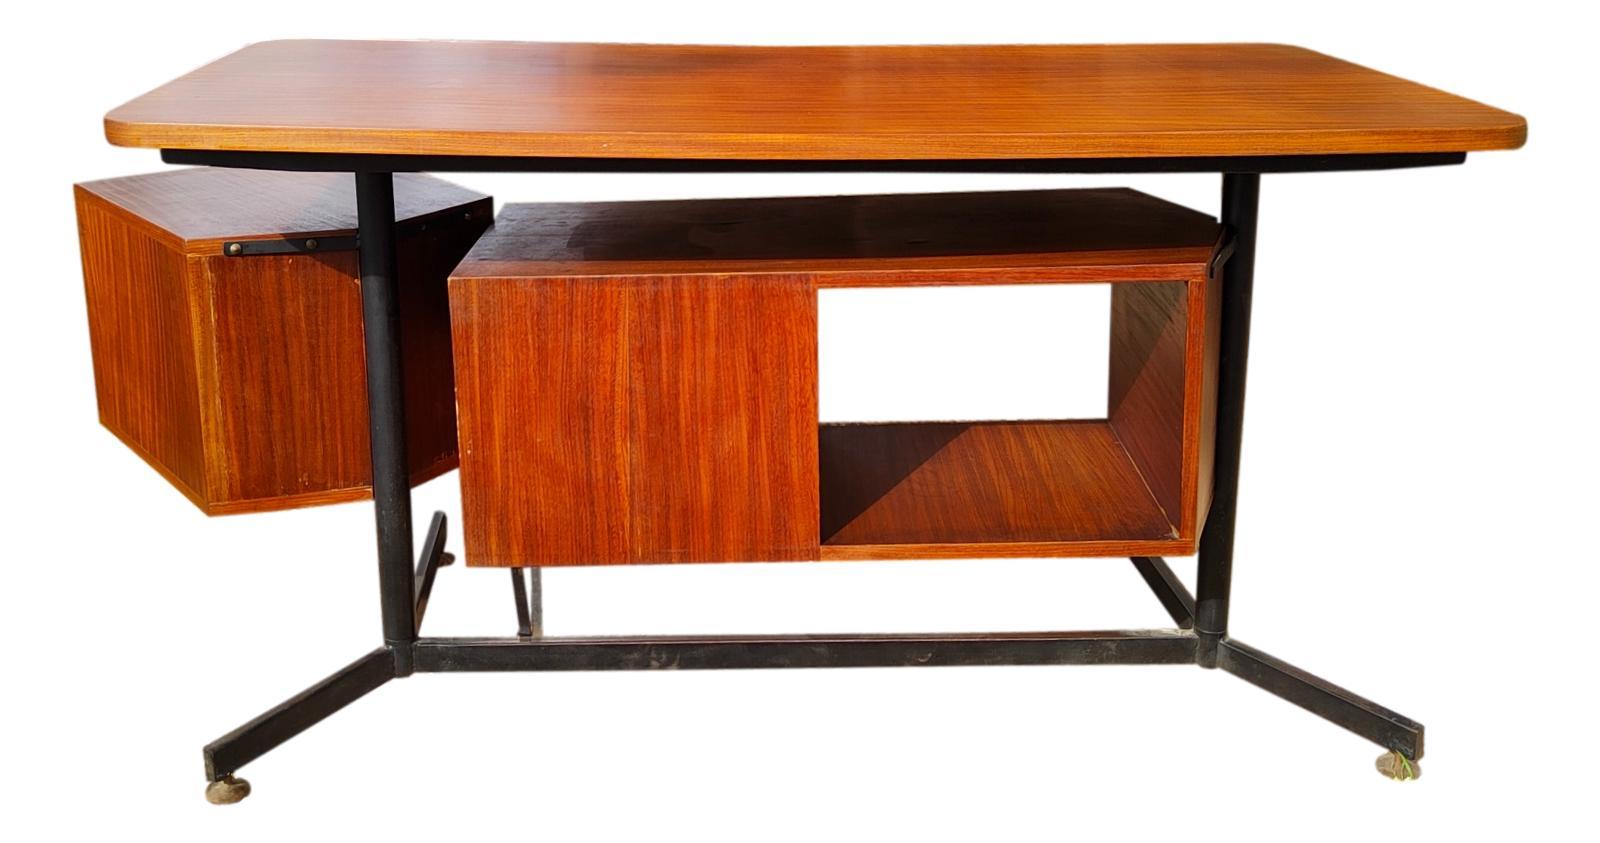 Wonderful t95 desk by osvaldo borsani for Tecno, Italy, about 1950.
Equipped with two chests of drawers, one suspended and rotatable, with a large window, the other fixed, on a black lacquered metal structure with brass feet.
The table top is